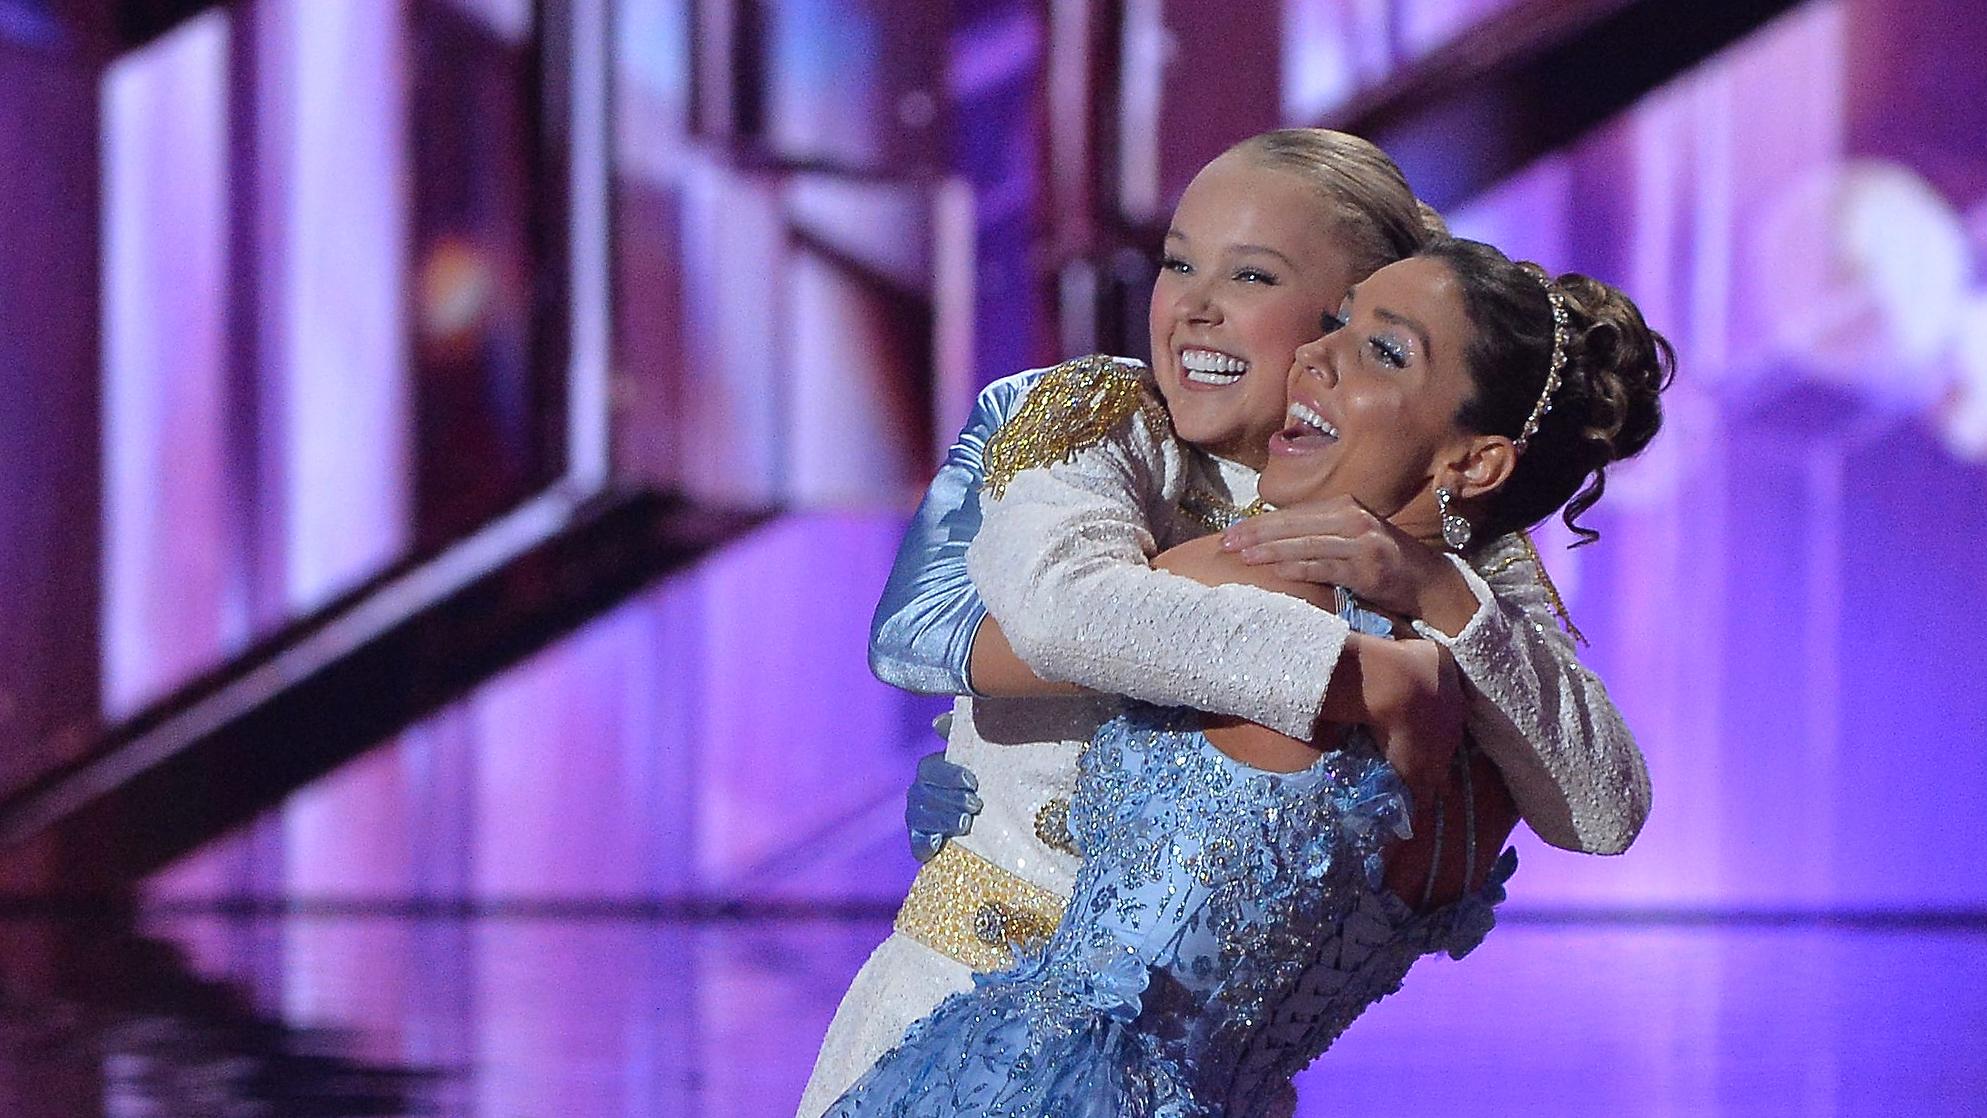 Why Is JoJo Siwa Dancing With a Girl in 'DWTS'?